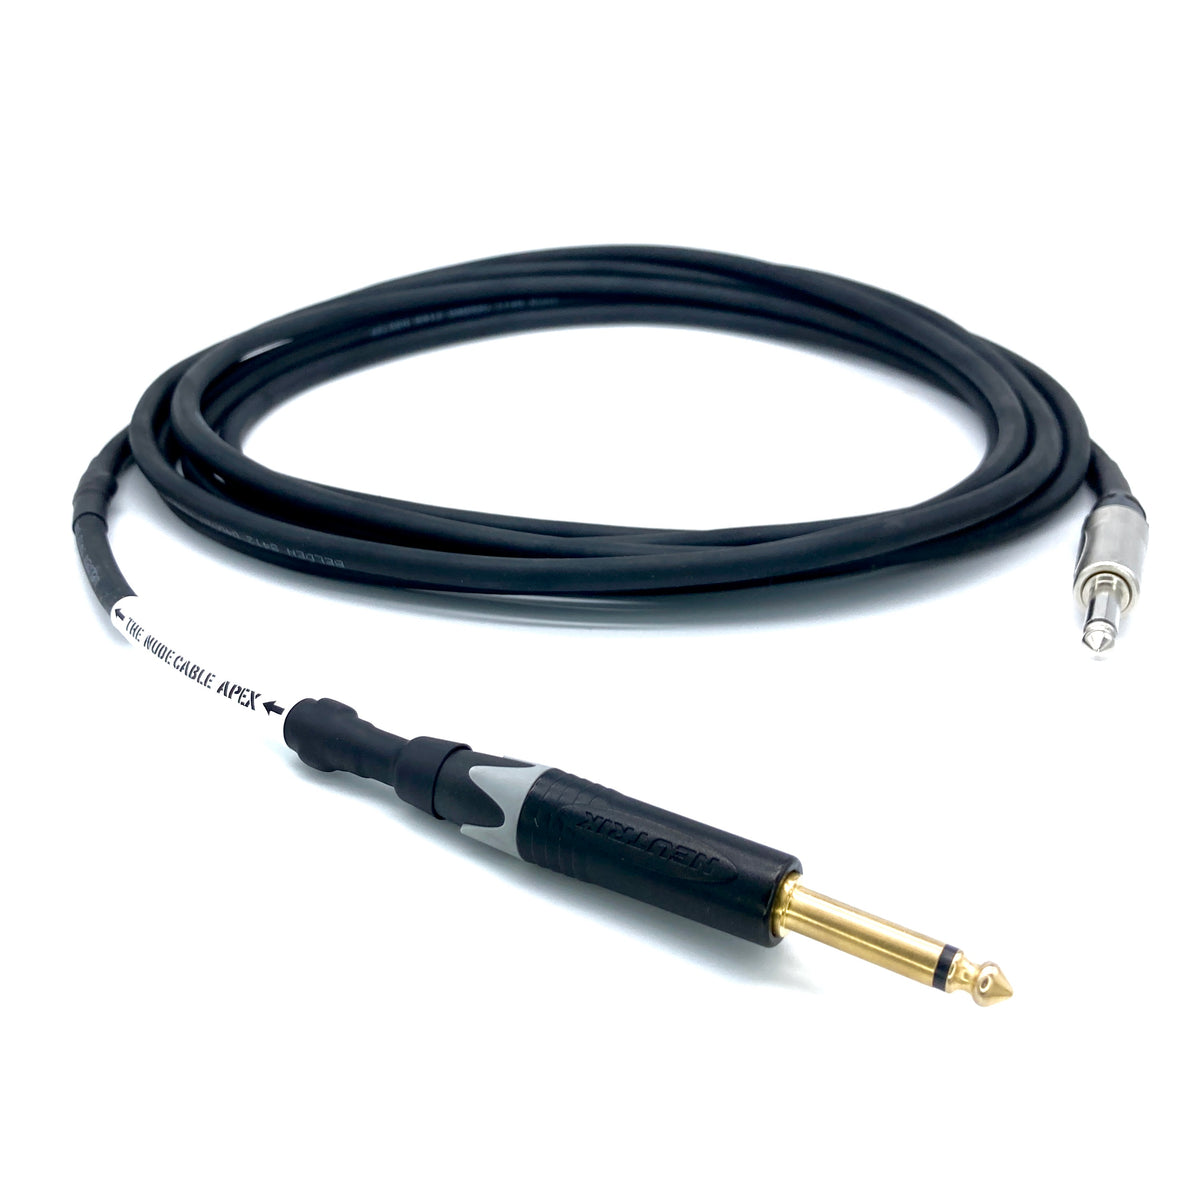 NUDE CABLE APEX 5m S-S (for guitar)